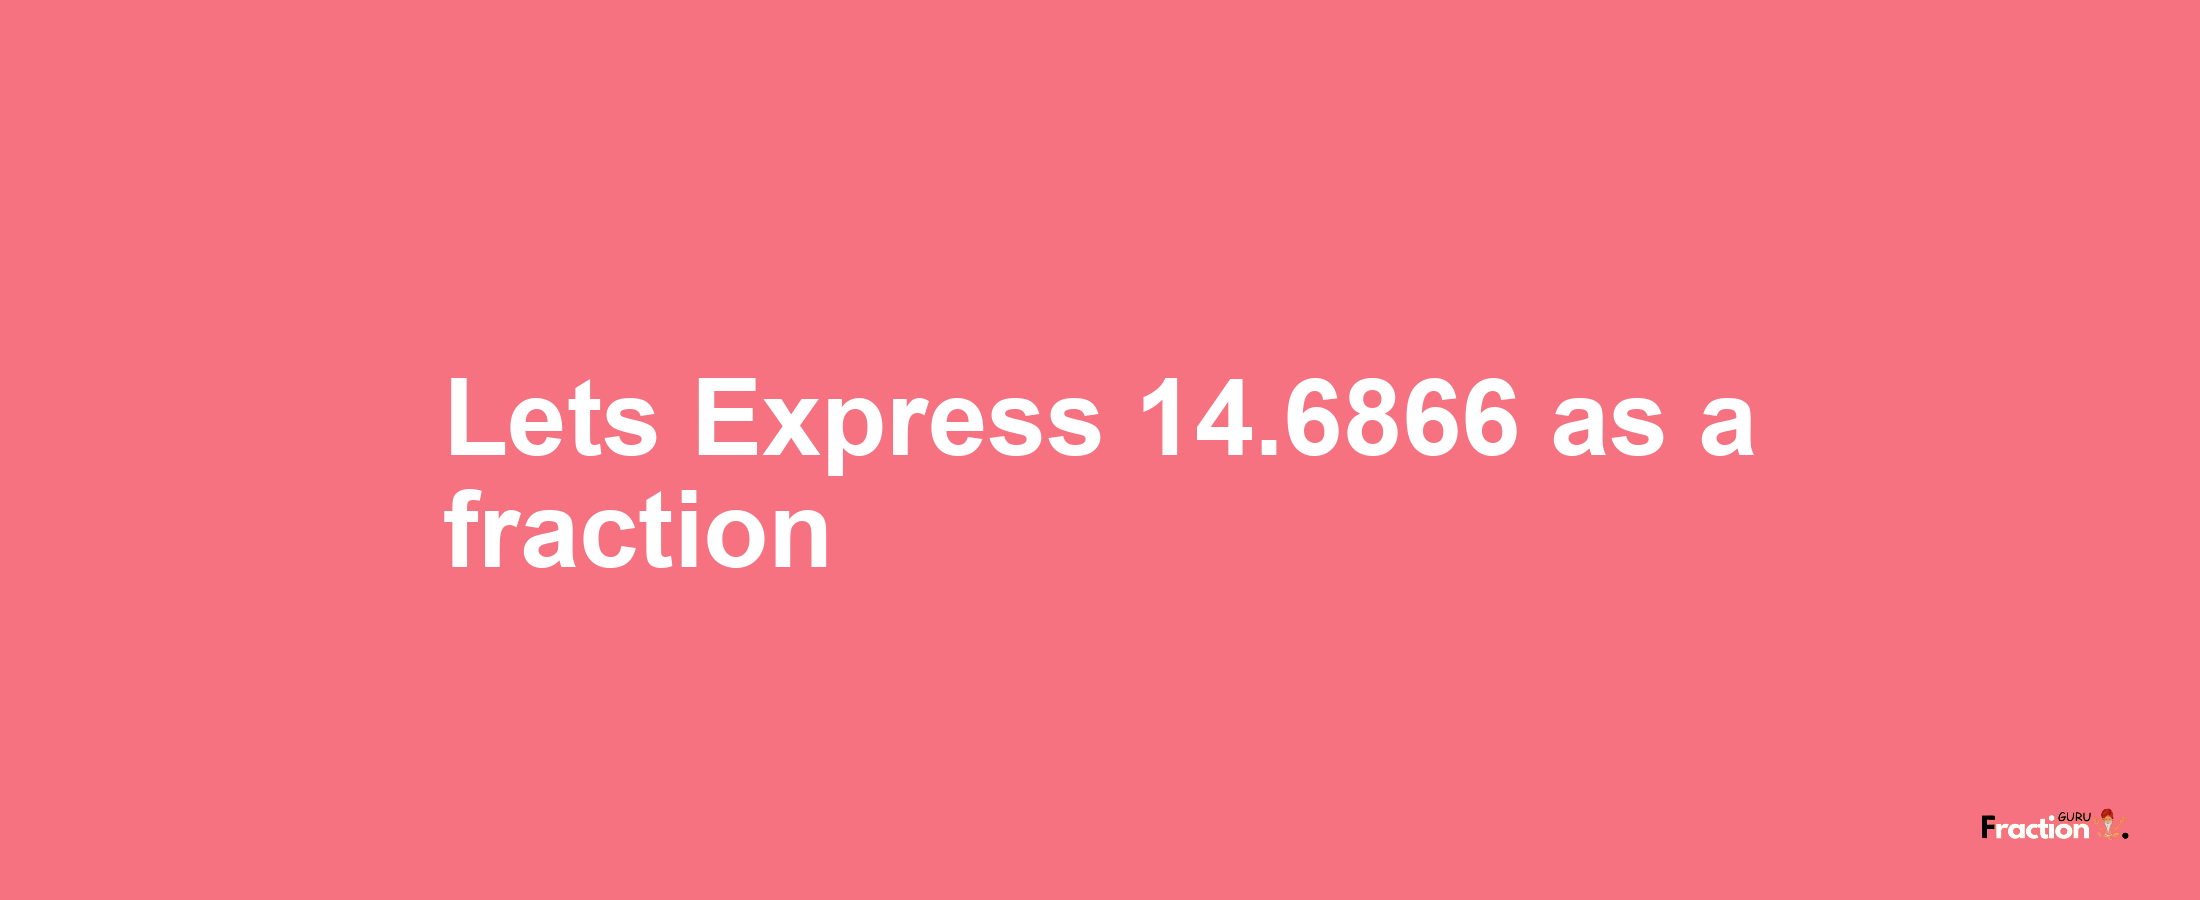 Lets Express 14.6866 as afraction